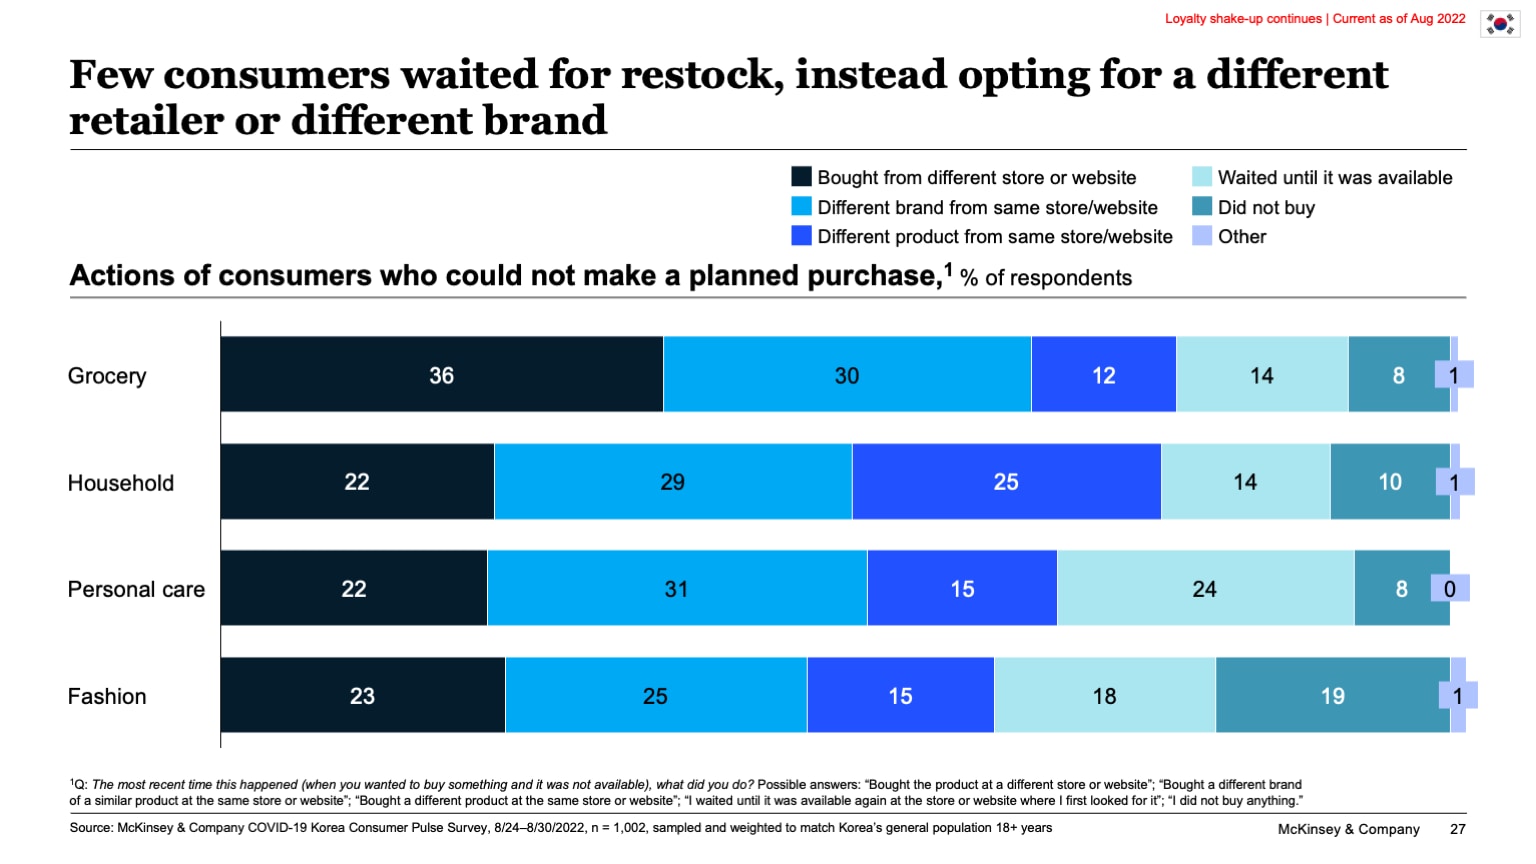 Few consumers waited for restock, instead opting for a different retailer or different brand